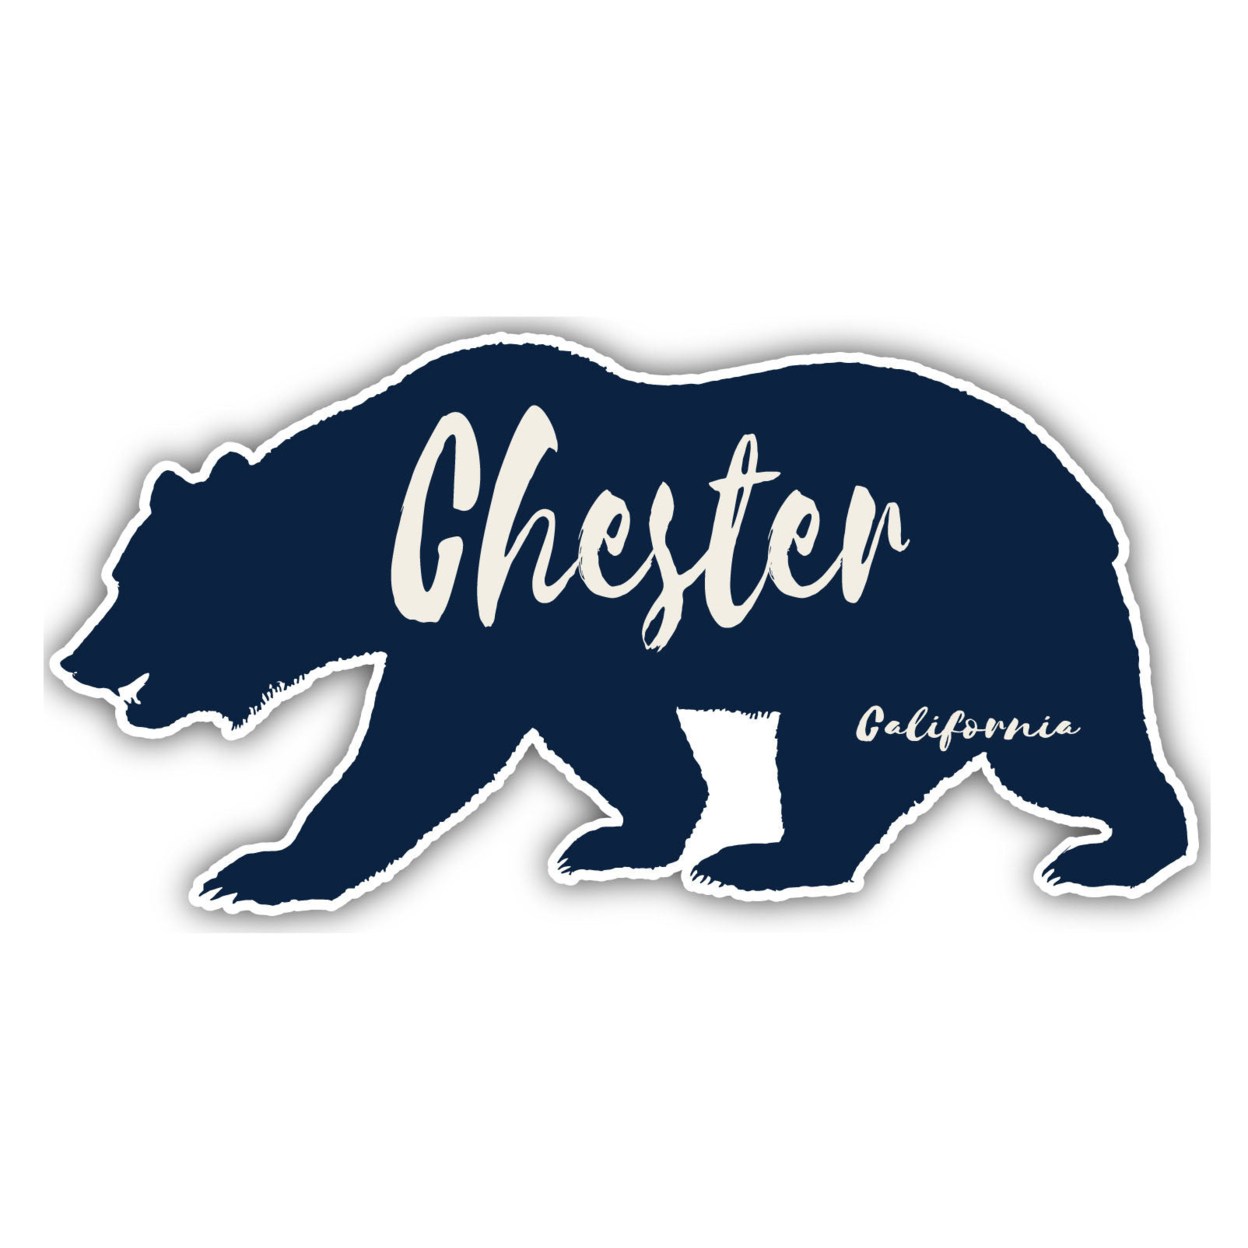 Chester California Souvenir Decorative Stickers (Choose Theme And Size) - Single Unit, 10-Inch, Great Outdoors